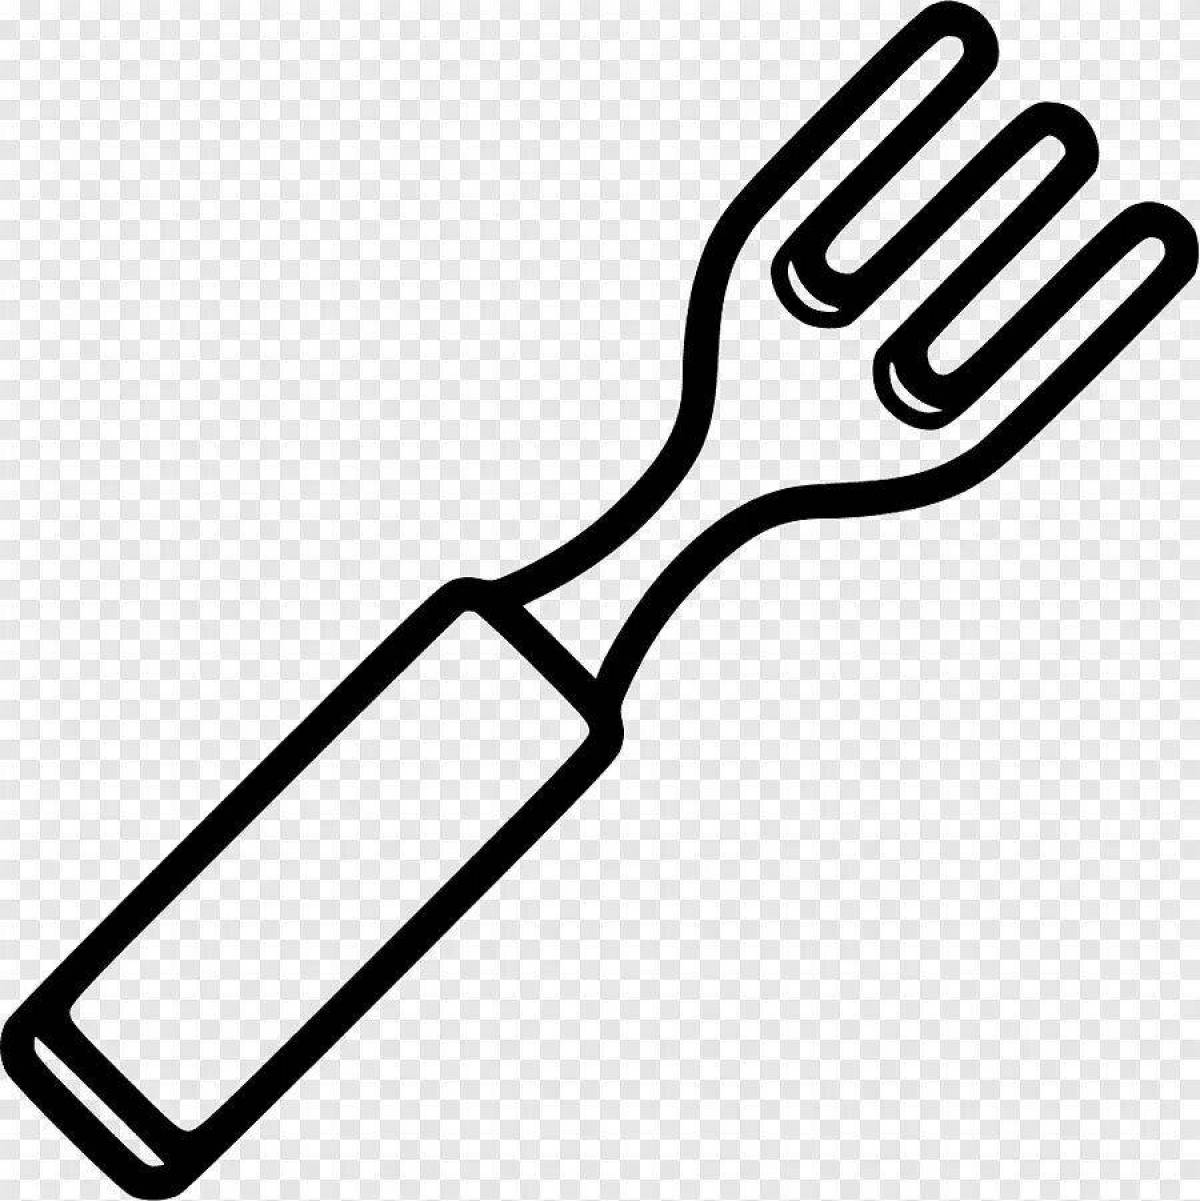 Charming fork coloring book